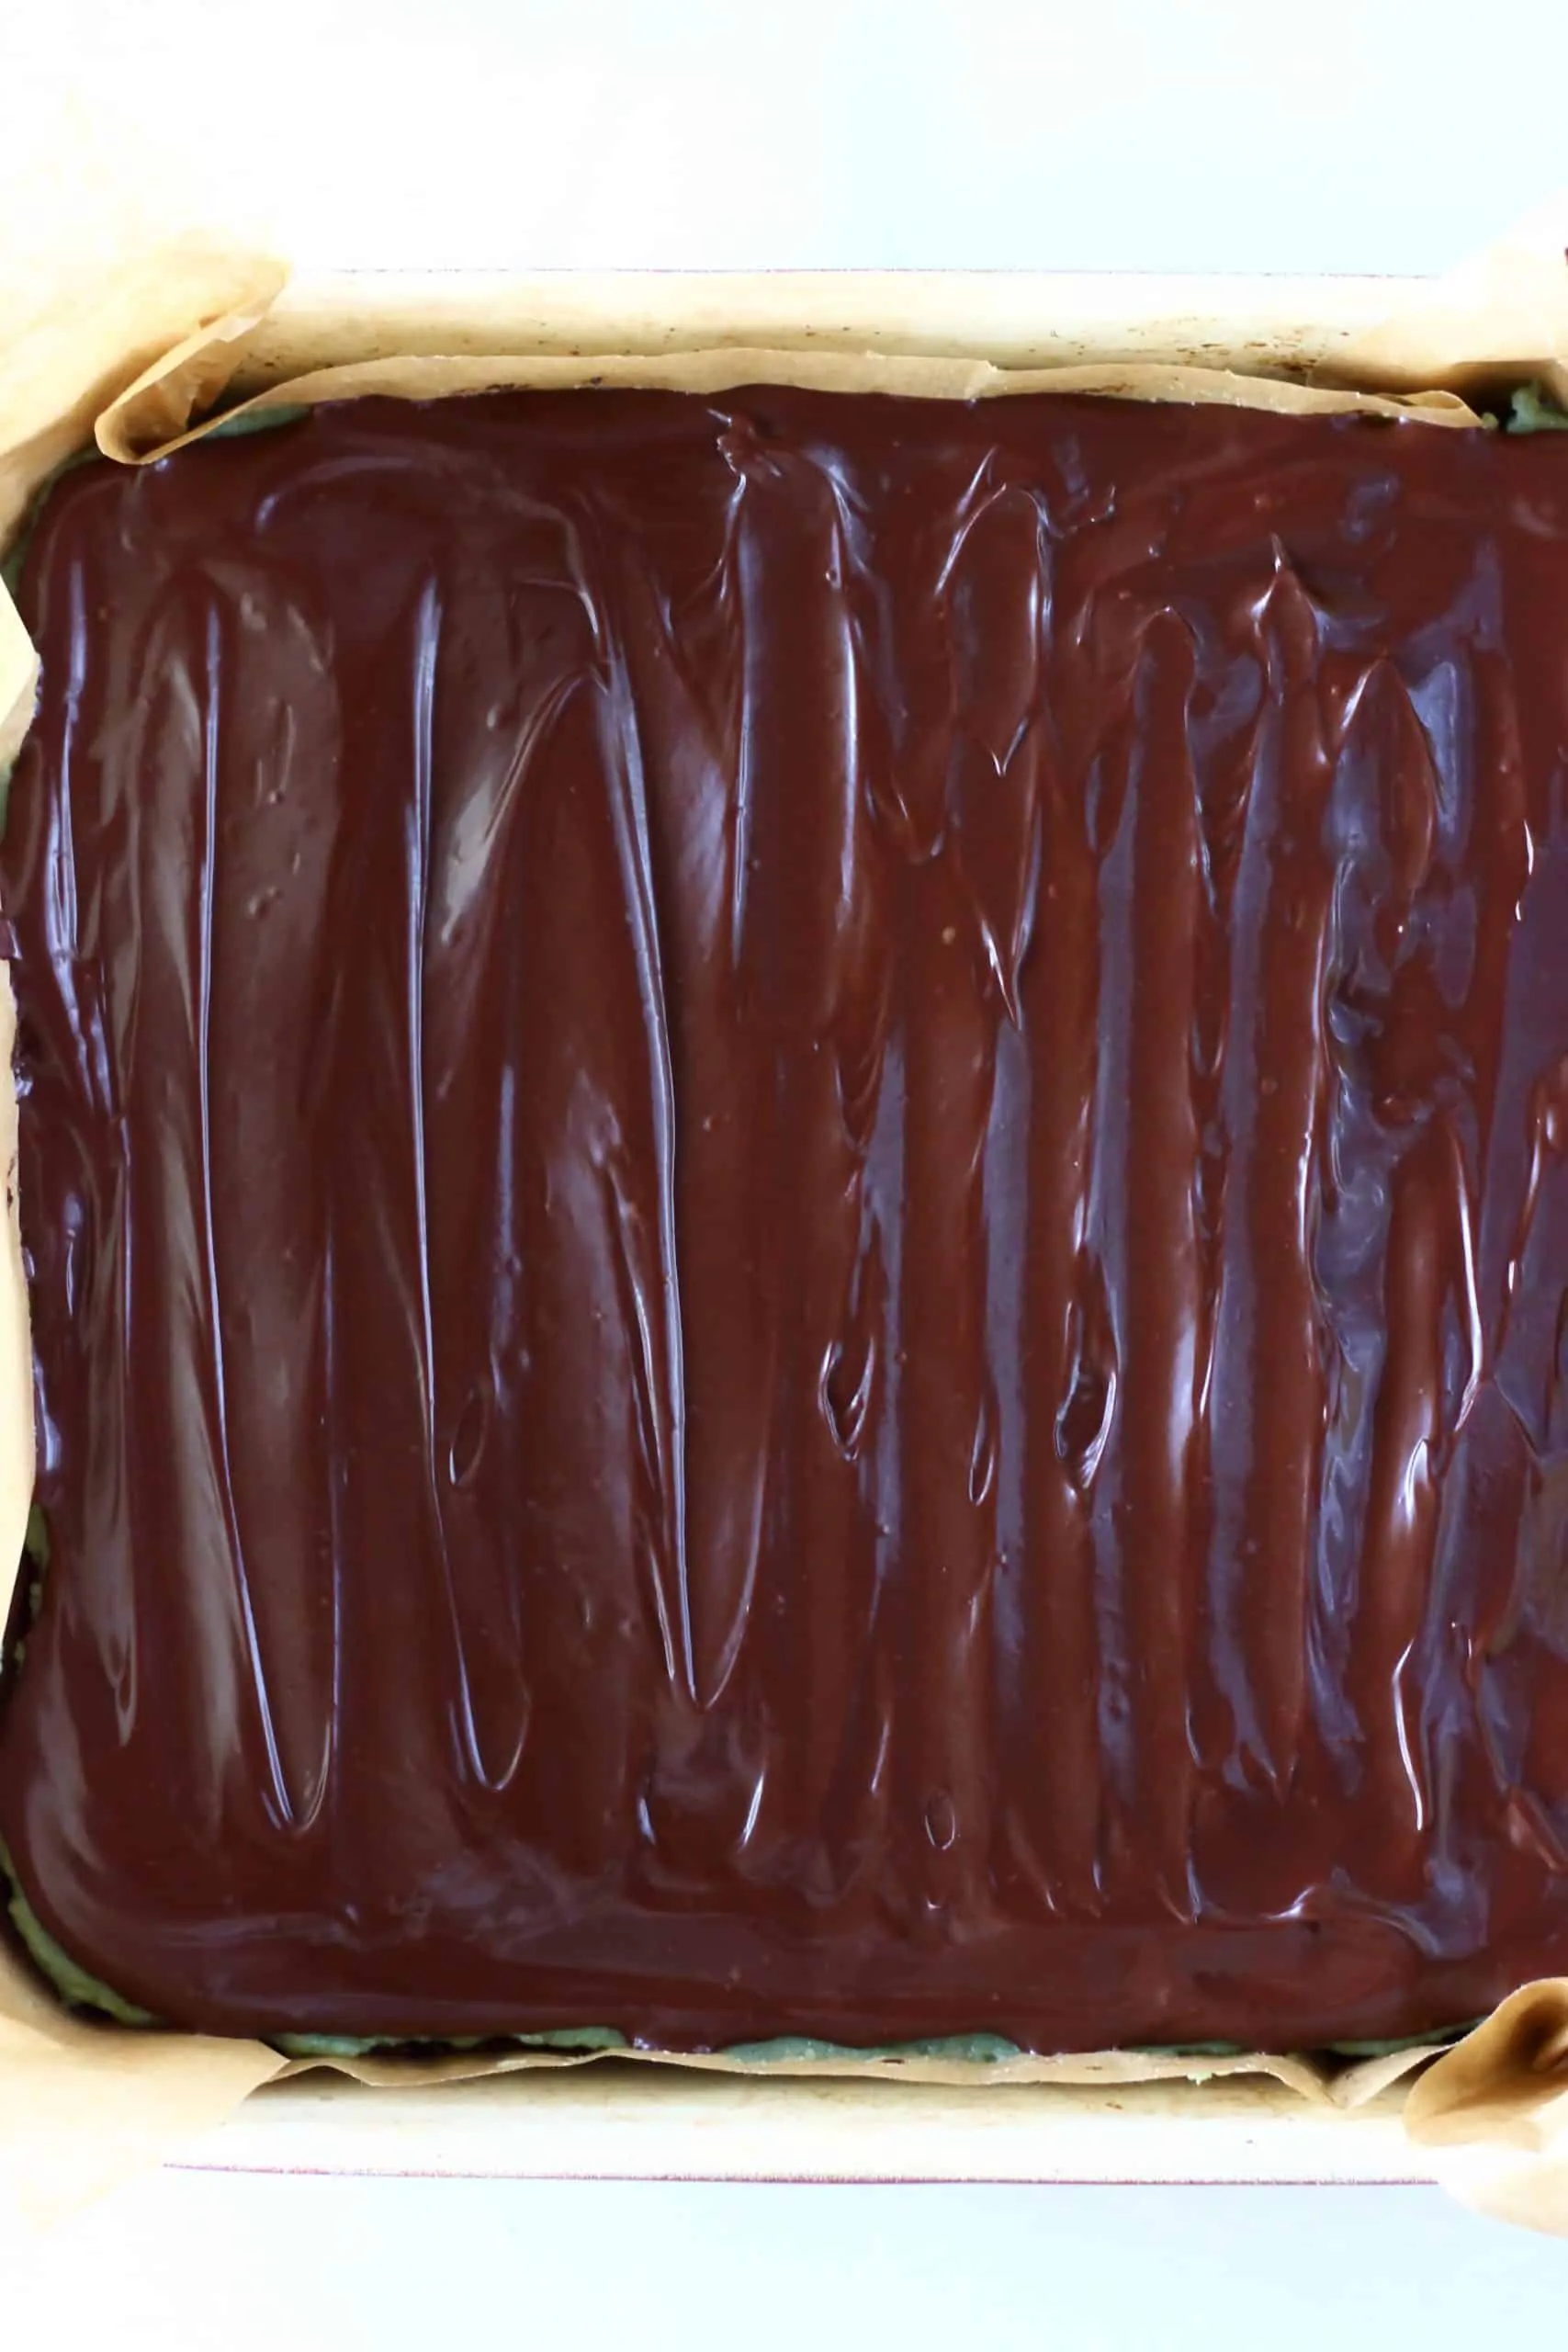 Vegan chocolate ganache spread over vegan peppermint brownies in a square baking tin lined with baking paper